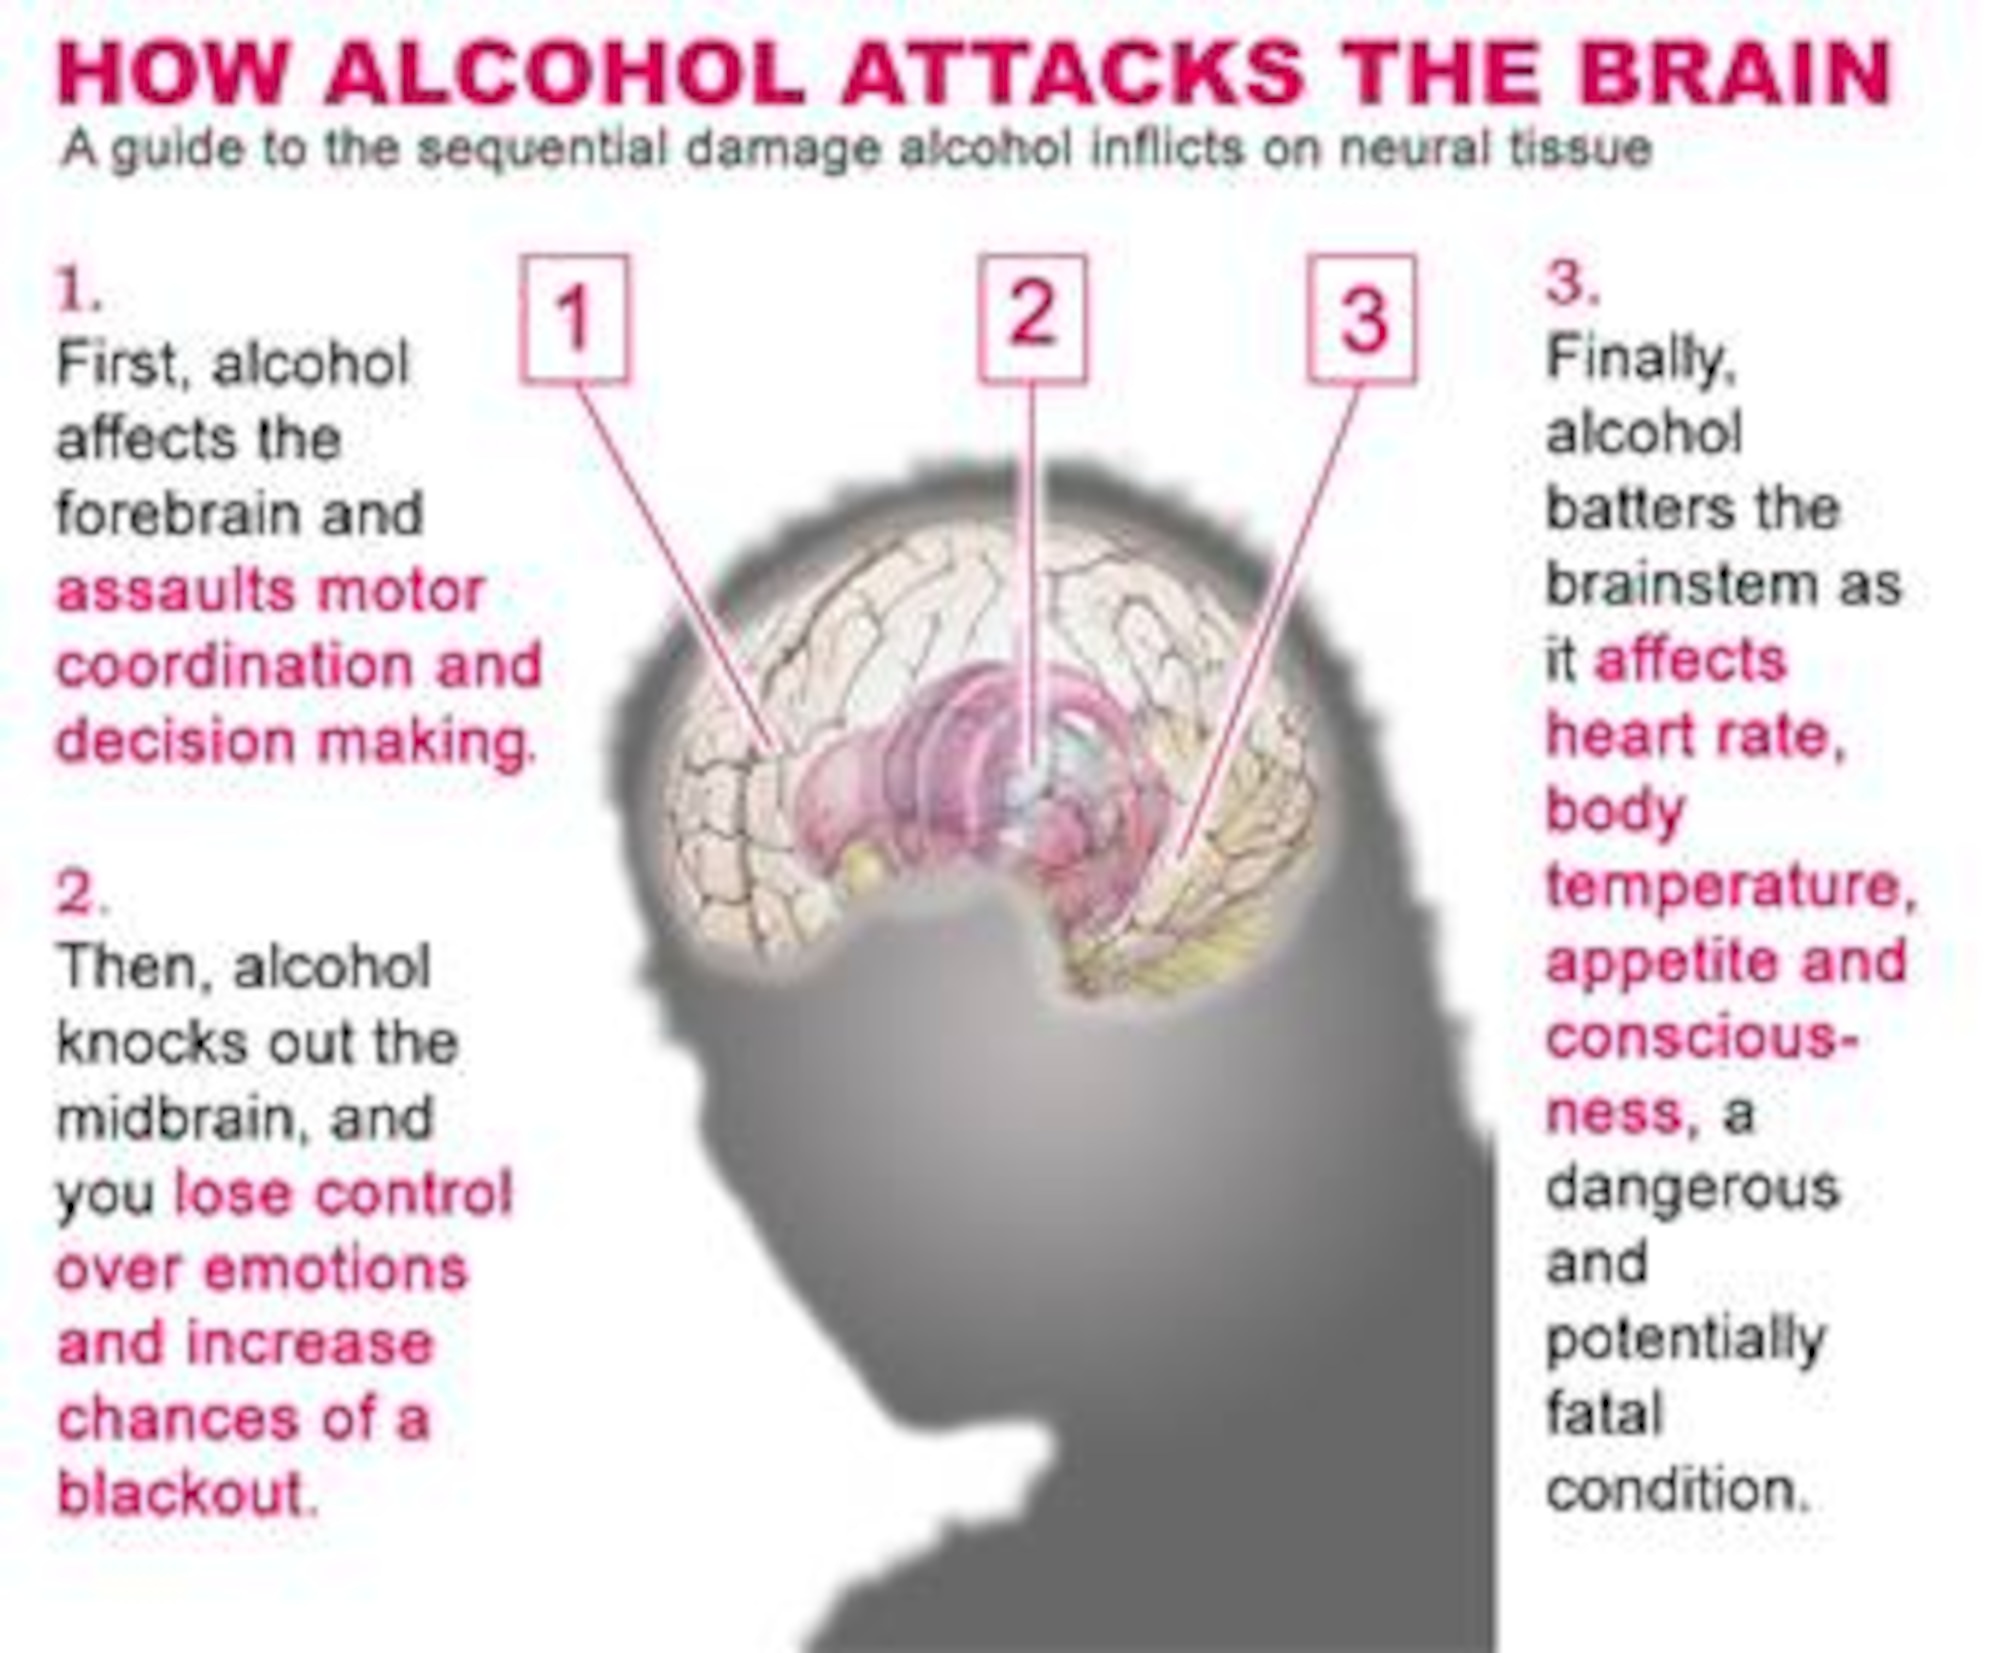 First, alcohol targets the brain's center for decision-making processes and muscular coordination in the forebrain. Then it unhinges the mind's normal system of checks and balances, leaving emotions unchecked by affecting the midbrain. Finally, alcohol attacks the brain stem and the body's vital functions. Preventing alcohol incidents is a must for mission effectiveness. (Graphic illustration by Senior Airman Stephen Cadette)